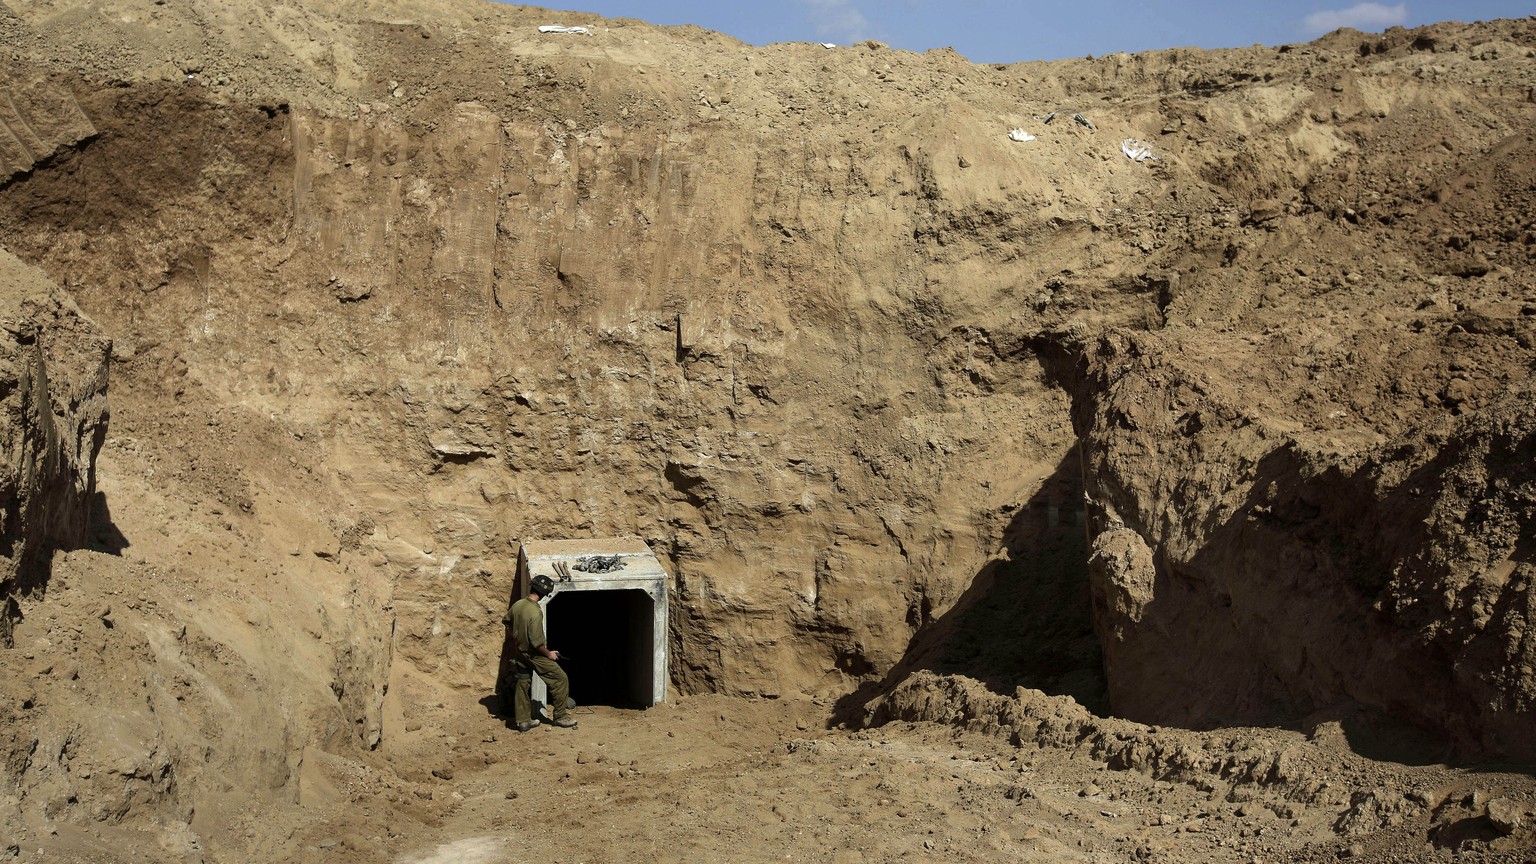 FILE - In this Sunday, Oct. 13, 2013 file photo, an Israeli soldier stands at the exit of a tunnel discovered near the Israel Gaza border. They’ve been dubbed “lower Gaza,” compared to the Underground ...